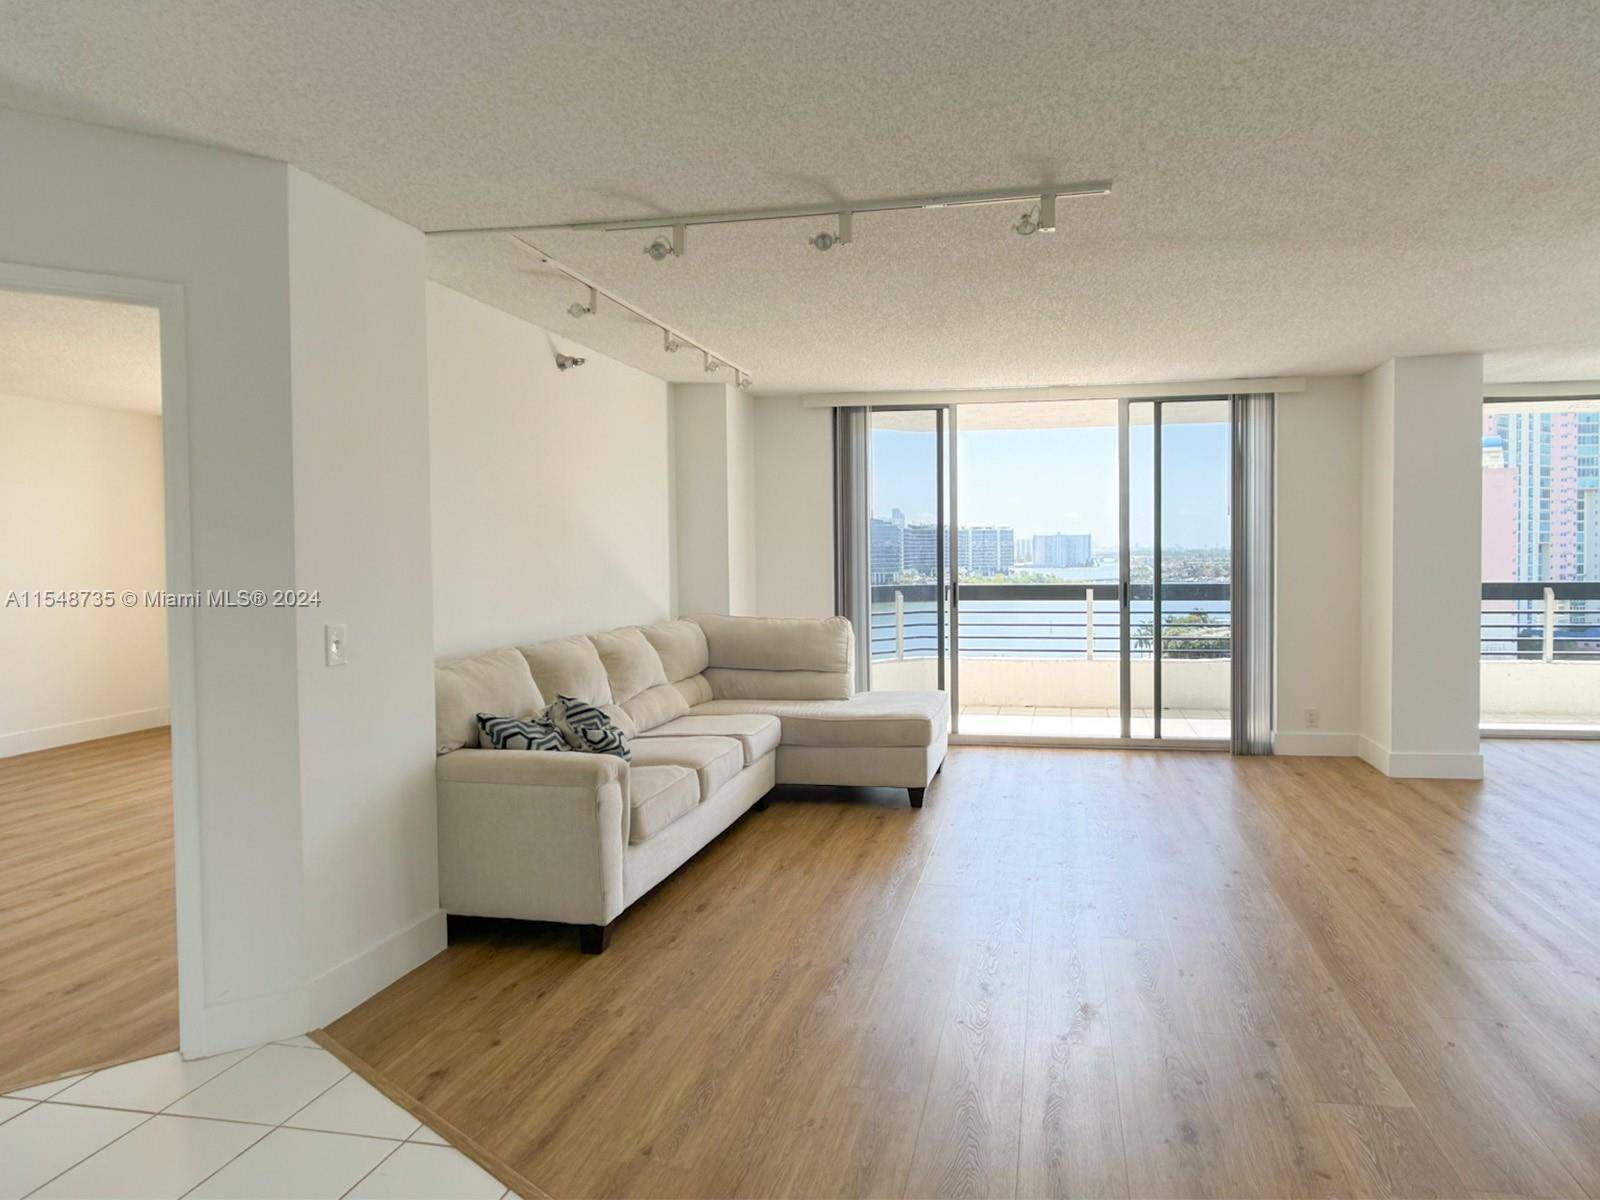 Spectacular views of Intracoastal and Ocean and Golf Course wrap around balcony to enjoy it.